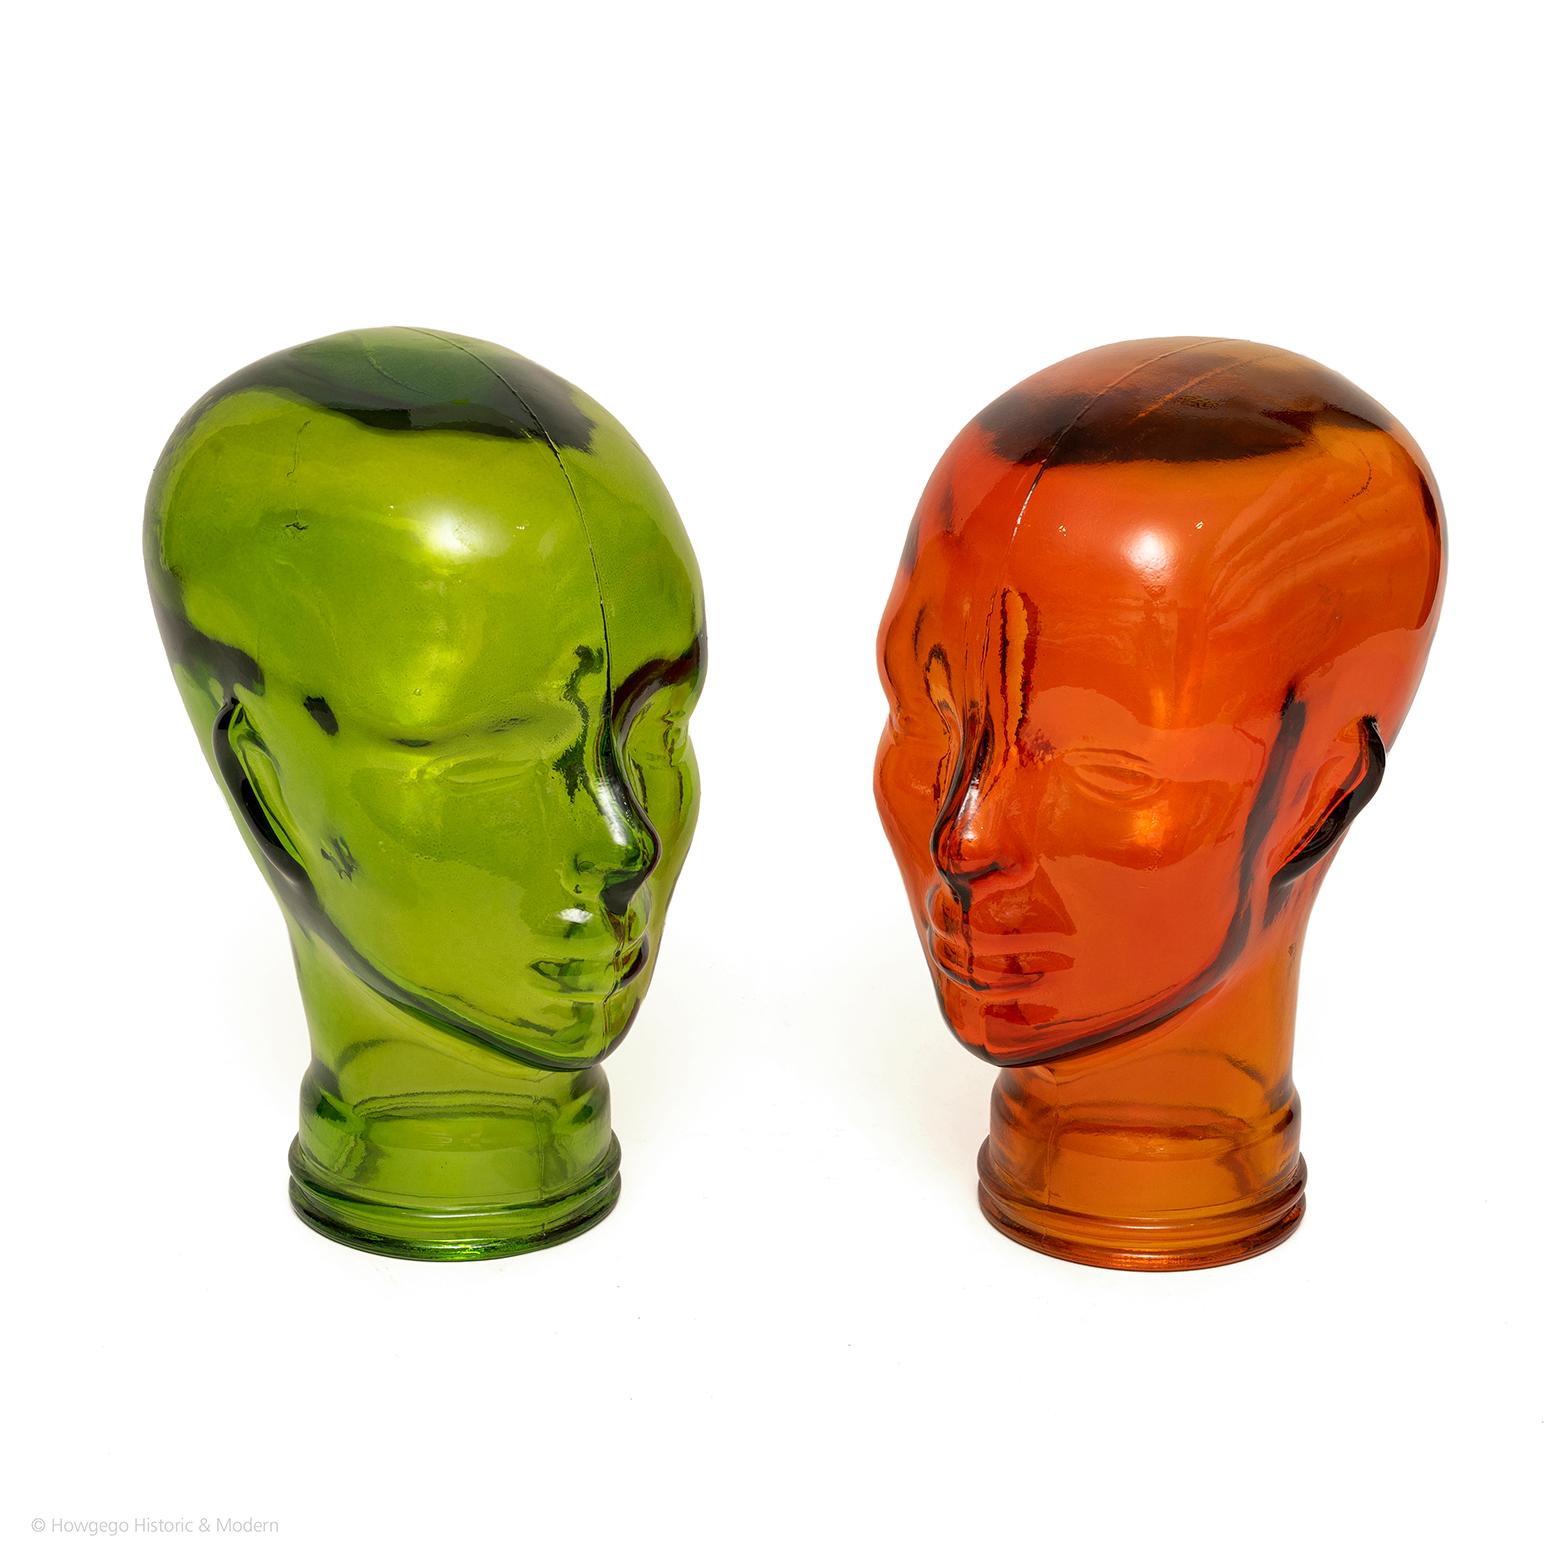 A pair of funky, vintage, coloured glass mannequin heads: one green, the other orange.  Designed for shop displays of hats, wigs, glasses etc and sometimes attached to full-body mannequins. 

Perfect conversation piece for displaying and storing